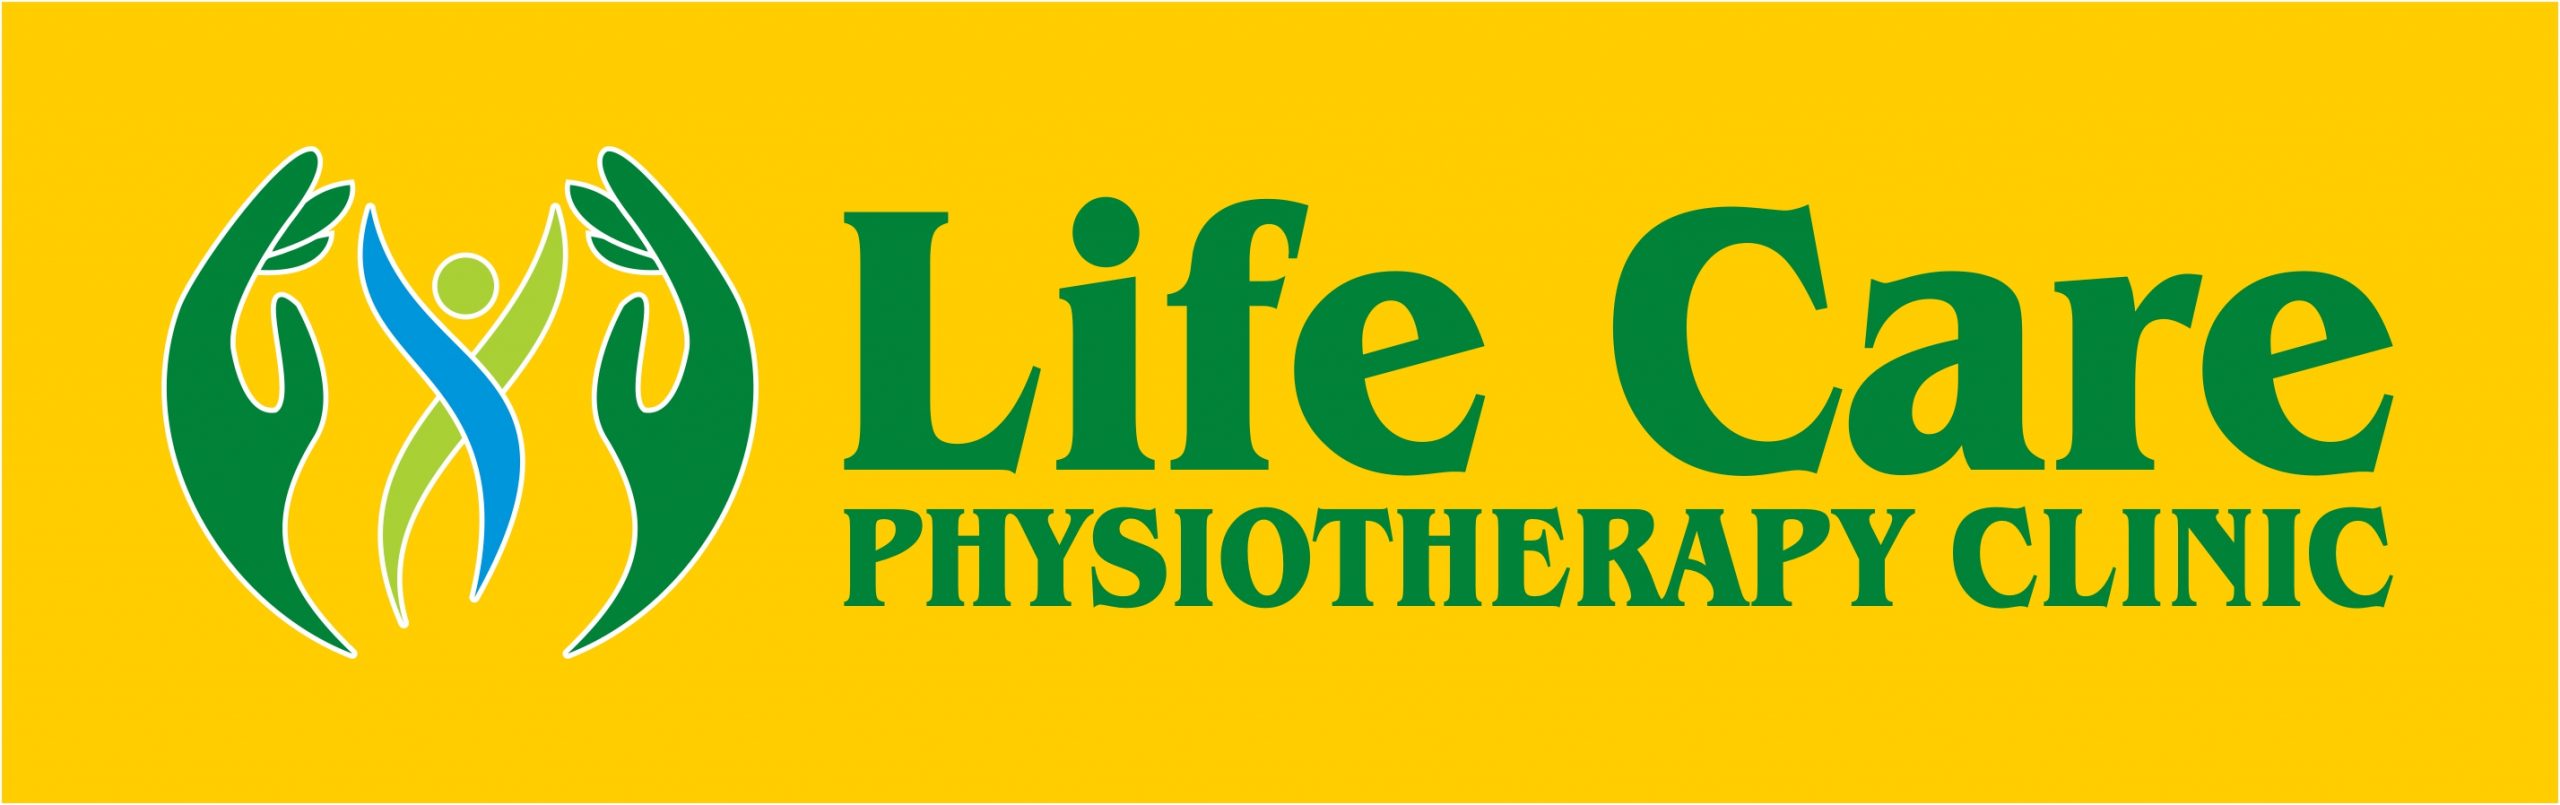 Life Care Physiotherapy Clinic